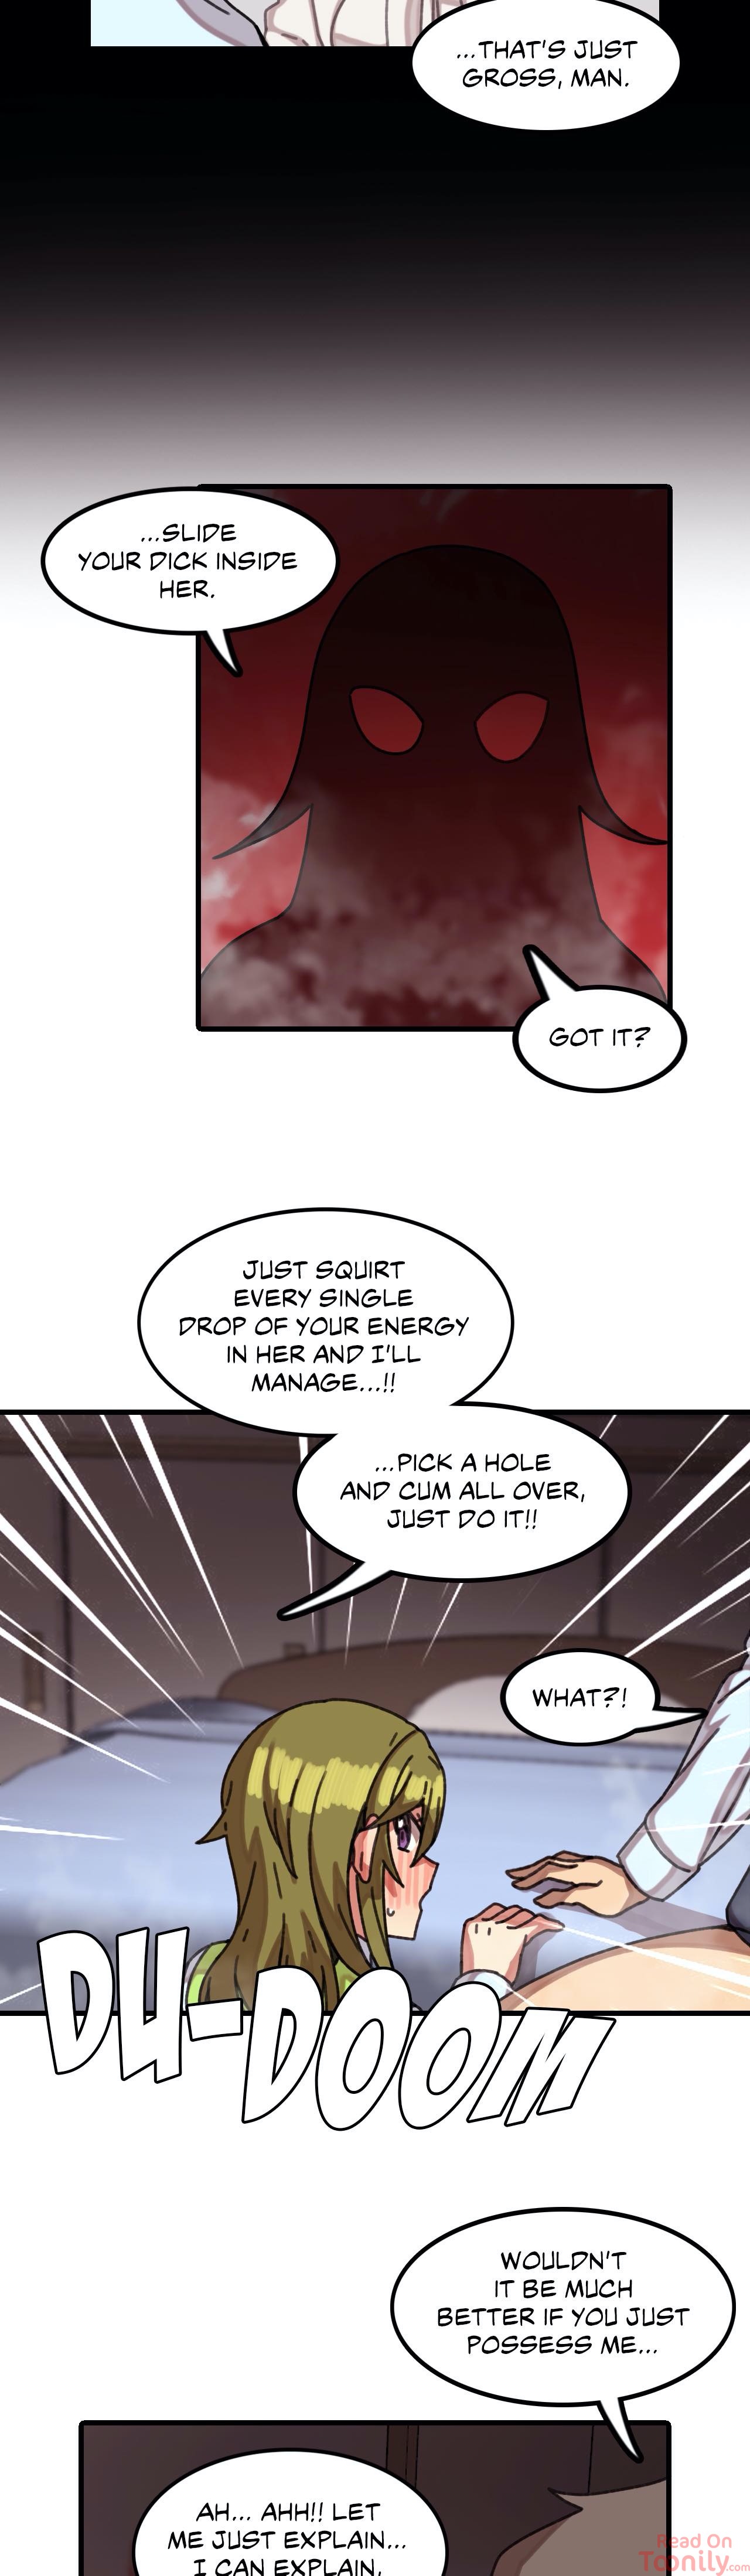 The Girl That Lingers in the Wall - Chapter 30 Page 5